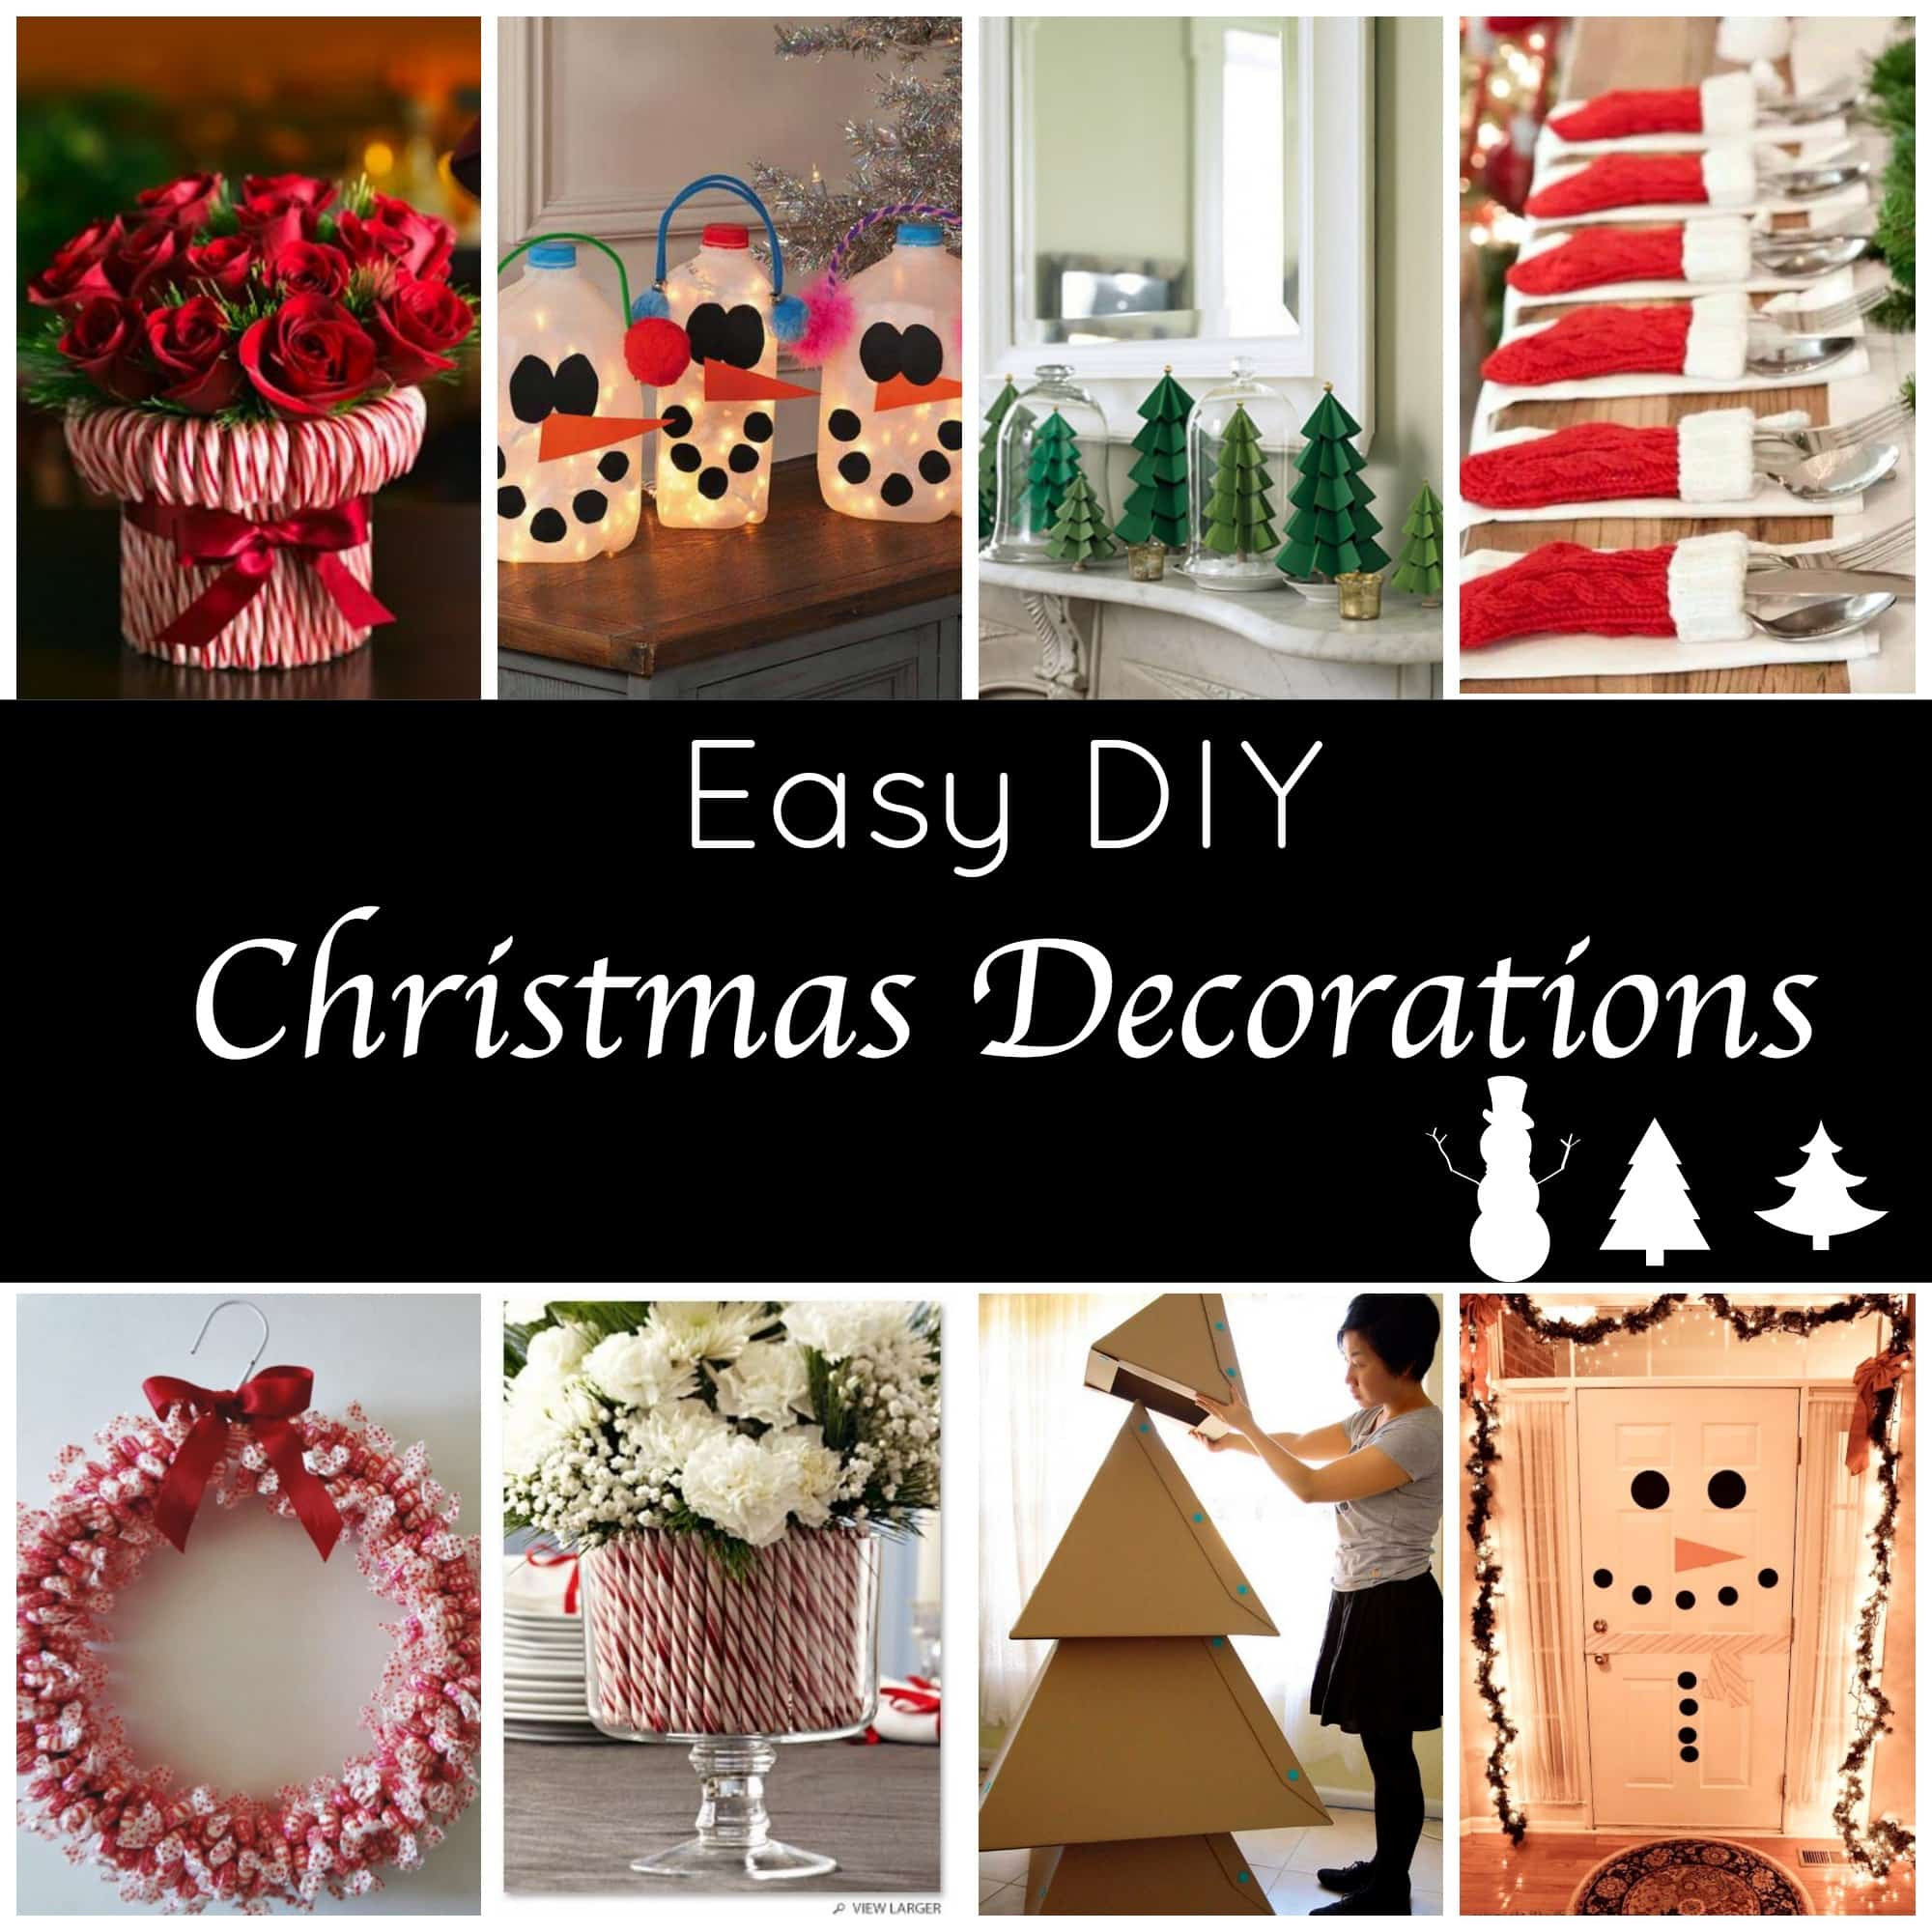 DIY For Christmas Decors
 Cute and Easy DIY Holiday Decorations for a Festive Home